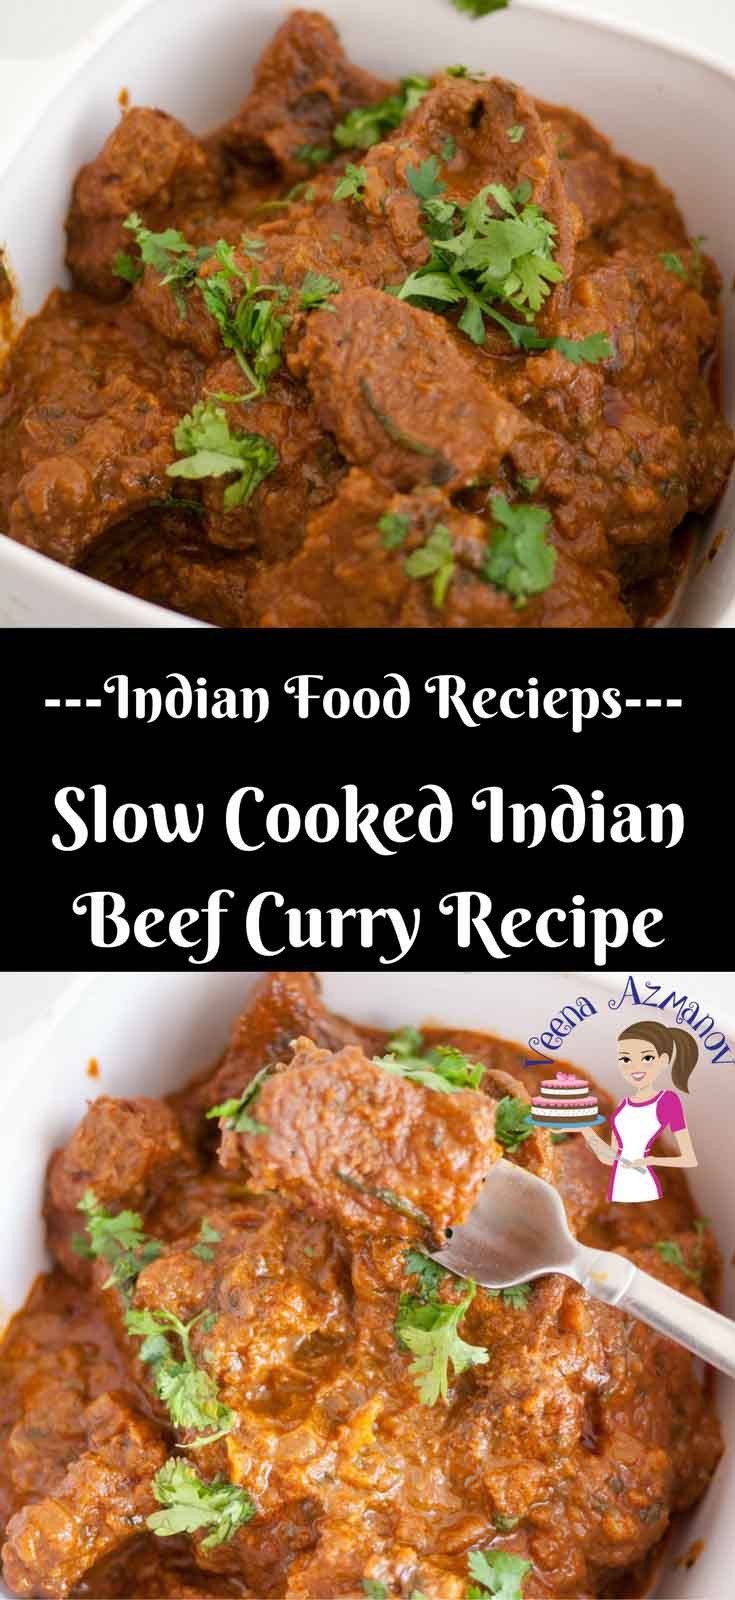 Slow Cooker Recipes Indian
 Slow Cooked Indian Beef Curry Recipe Slow Cooker Beef